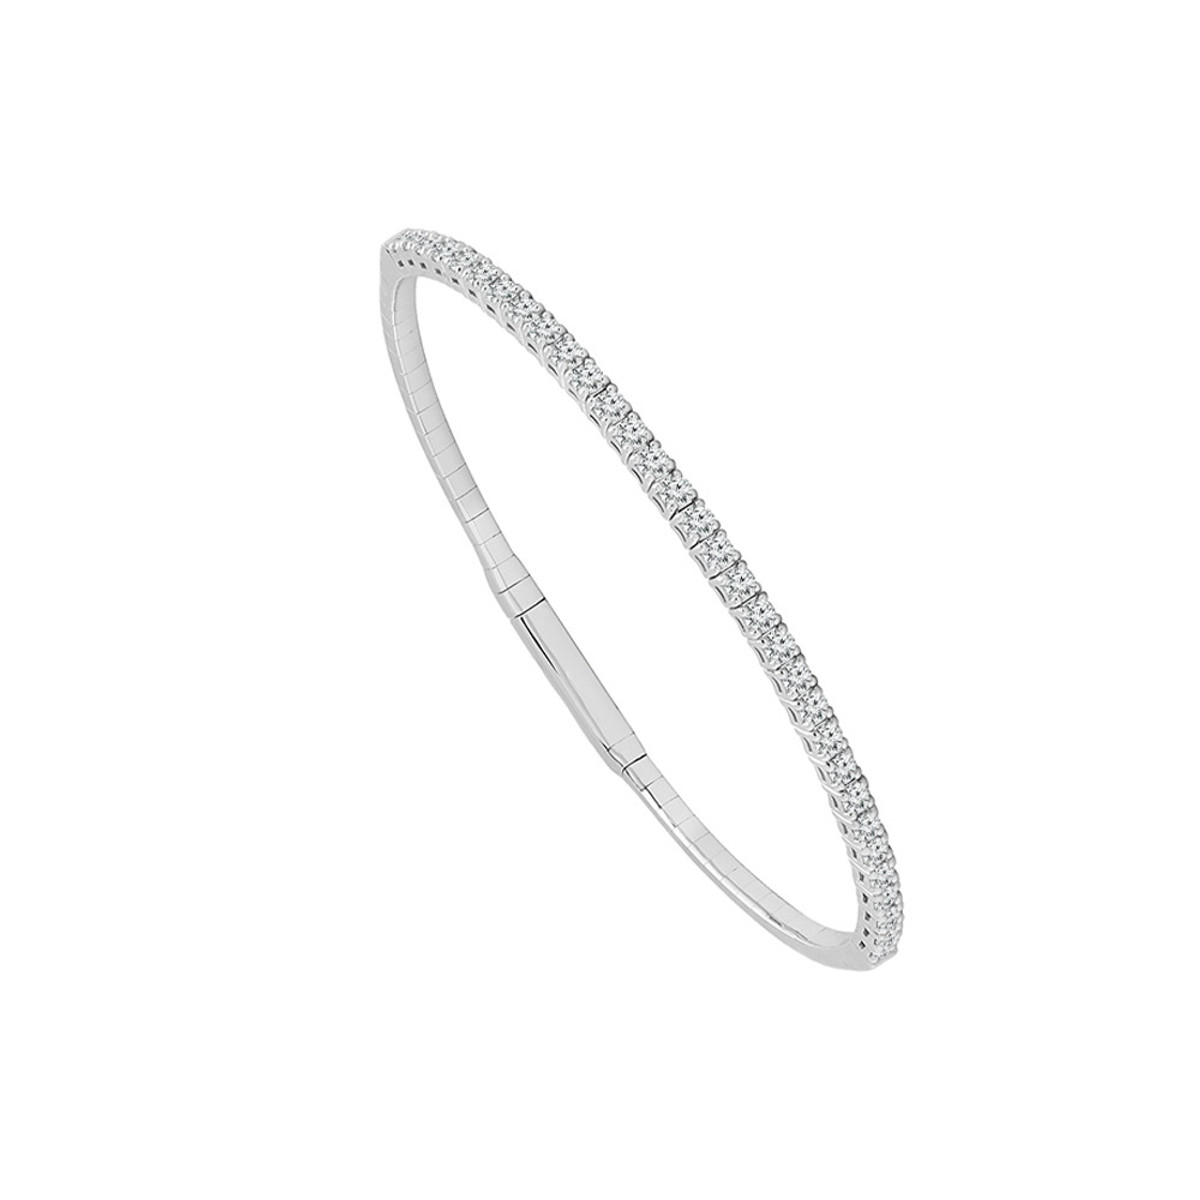 Hyde Park Collection 14K White Gold Diamond Bangle-33190 Product Image